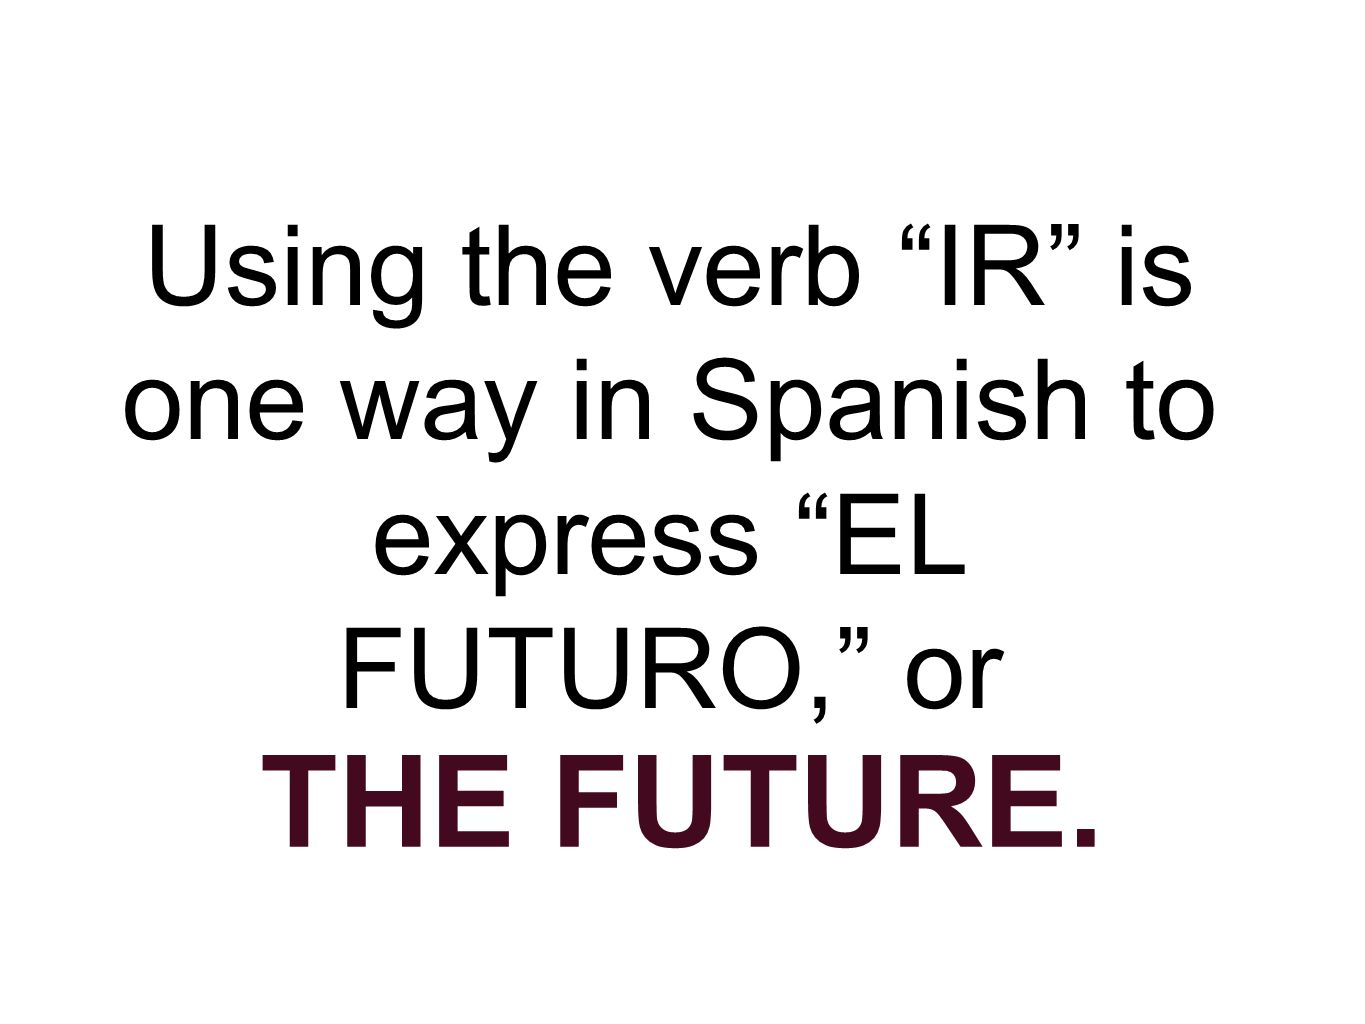 Using the verb IR is one way in Spanish to express EL FUTURO, or THE FUTURE.